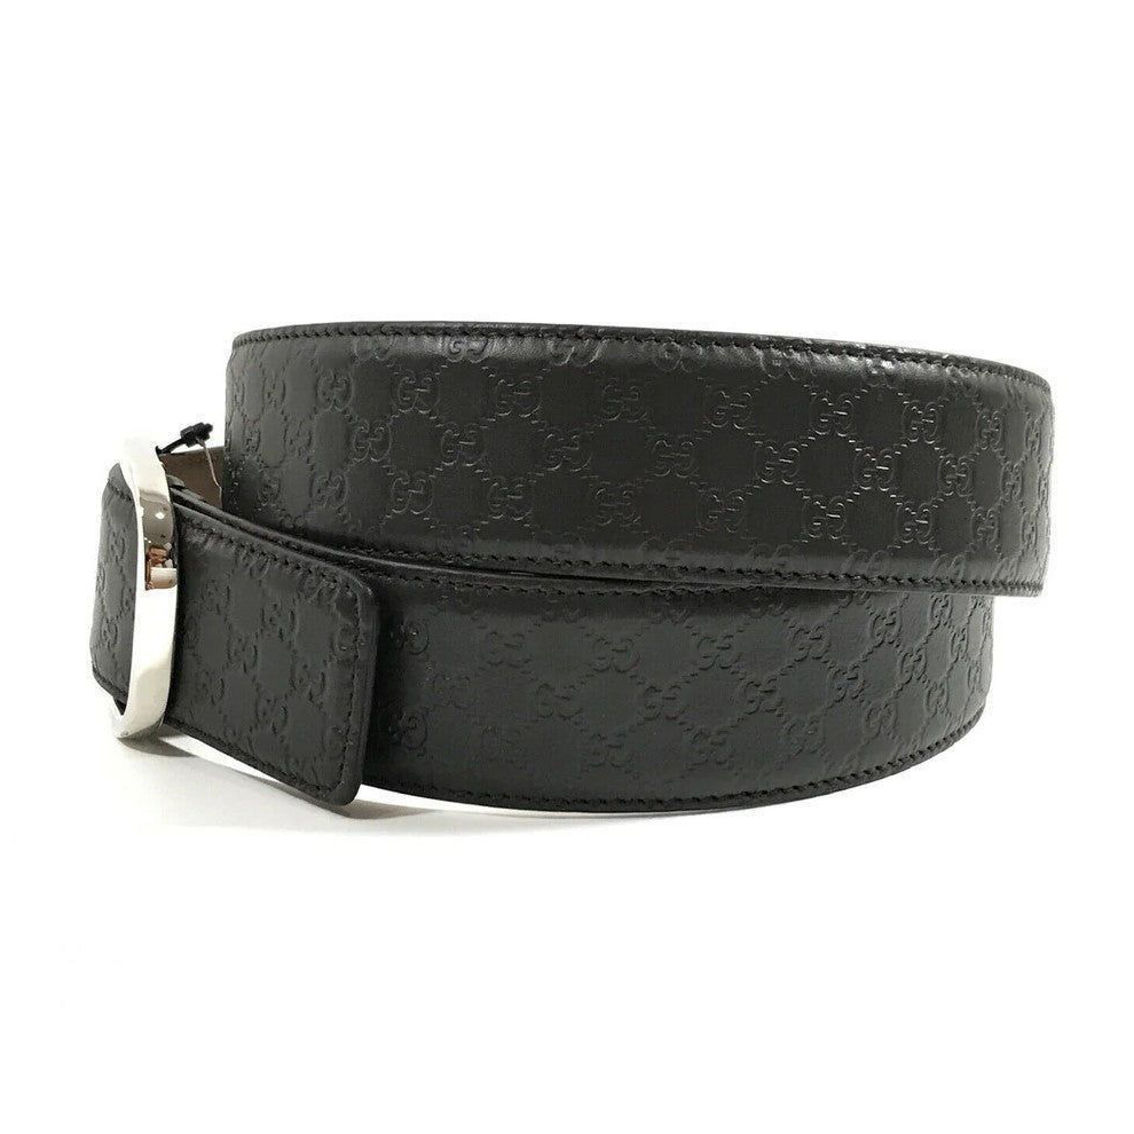 Gucci Micro GG Black Calf Leather Silver Buckle Belt Size 95/38 - Image 4 of 5